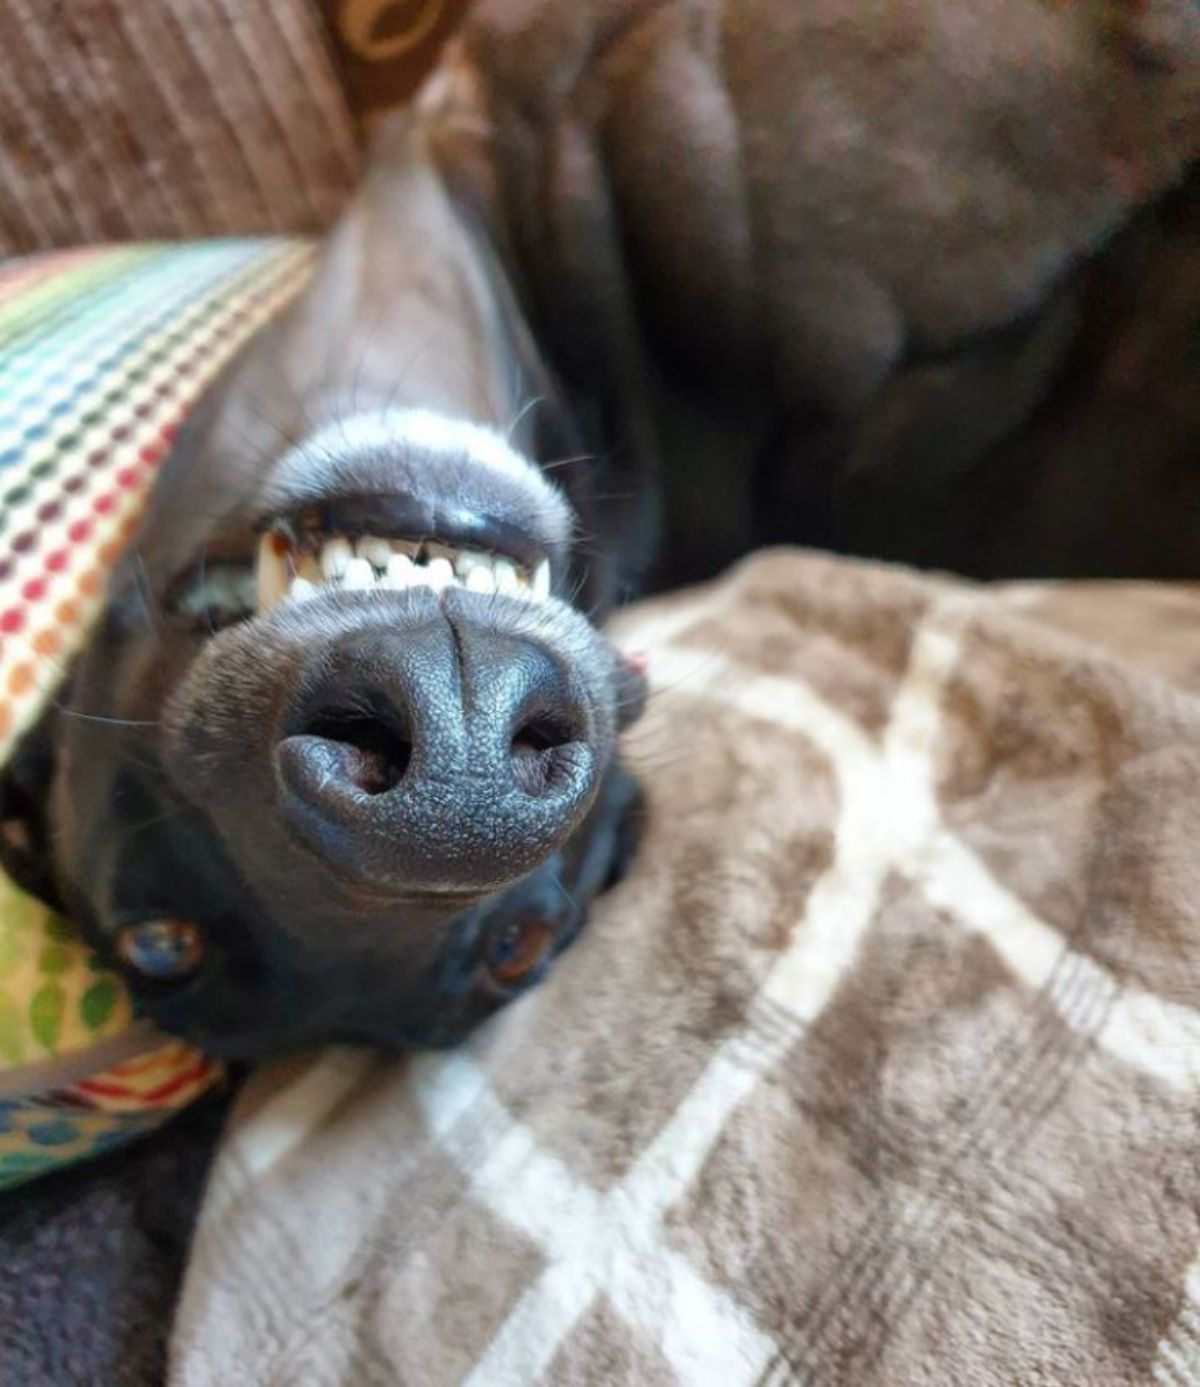 old black greyhound sleeping belly up with a close up on the dog's upside down face showing teeth